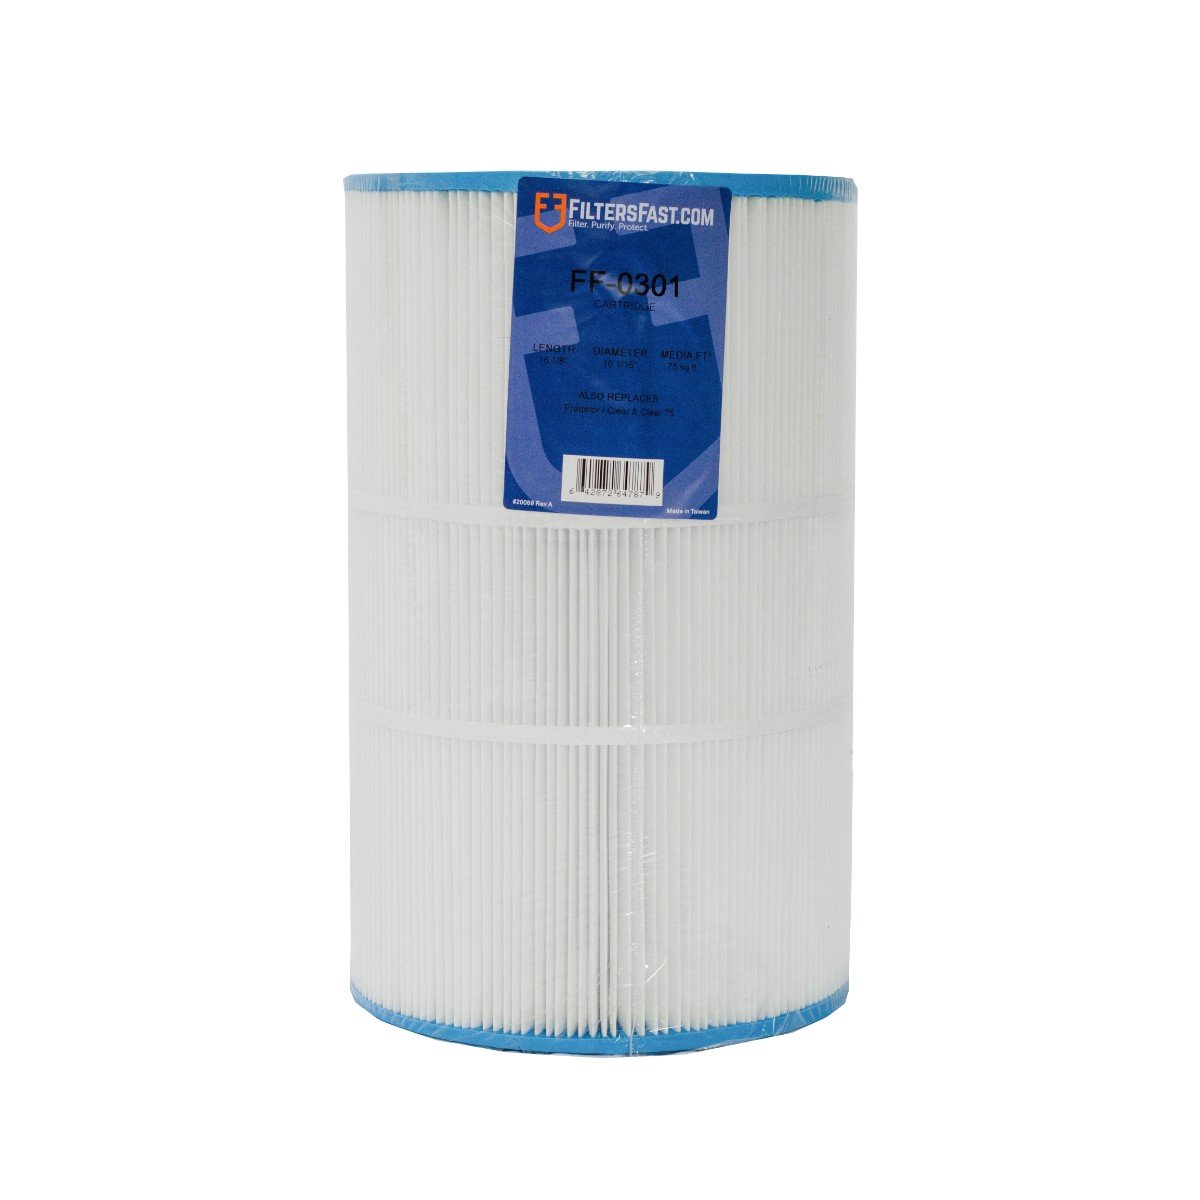 Filters Fast&reg; FF-0301 Replacement Pool & Spa Filter Cartridge